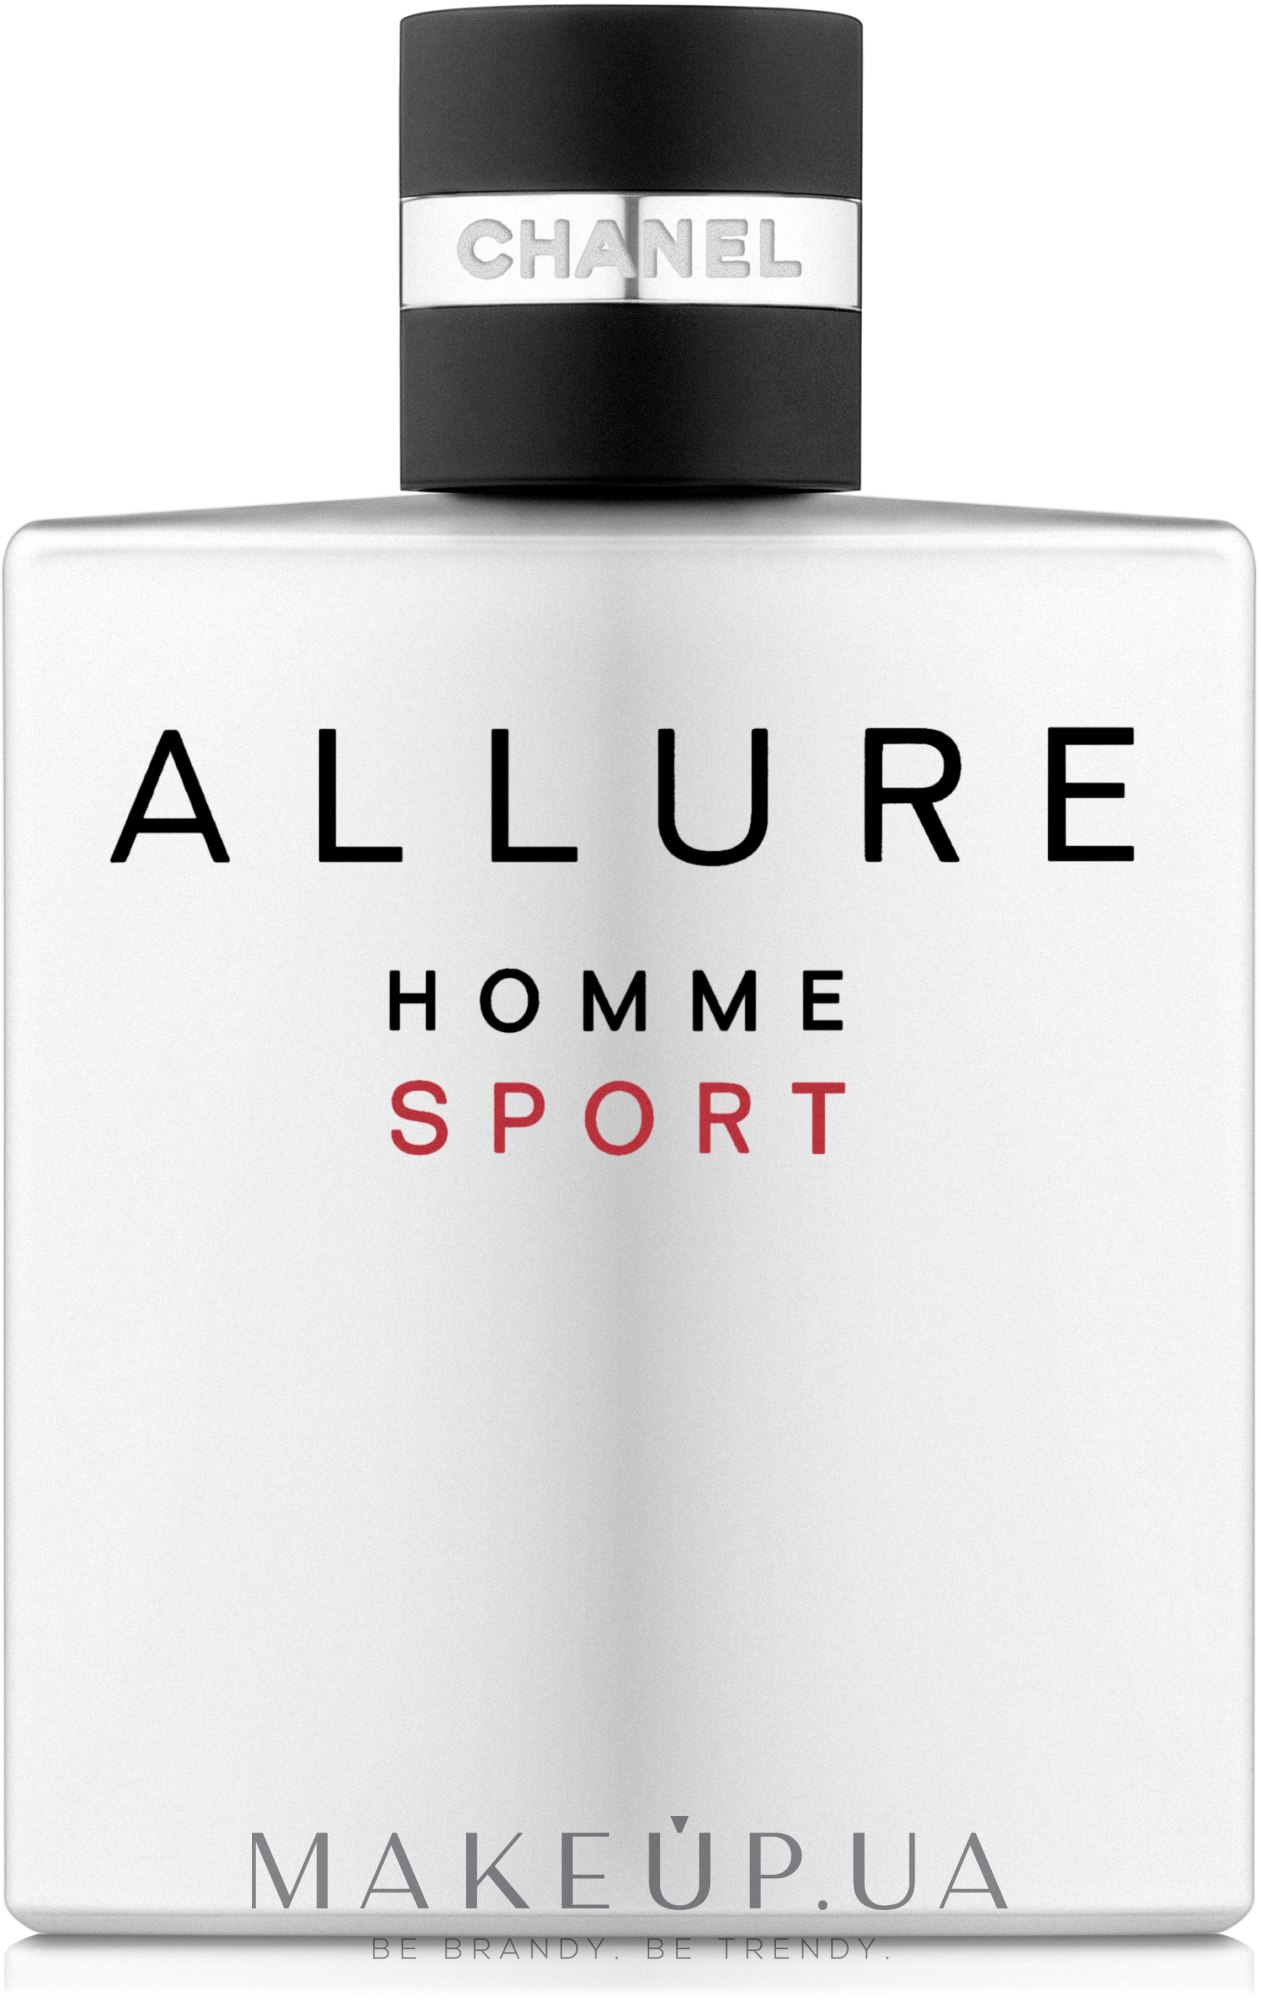 Духи allure homme. Chanel Allure homme Sport Eau extreme. Chanel Allure homme Sport туалетная вода 100 мл. Chanel Allure homme Sport Eau extreme 150мл. Chanel Allure homme Sport Eau extreme EDT.